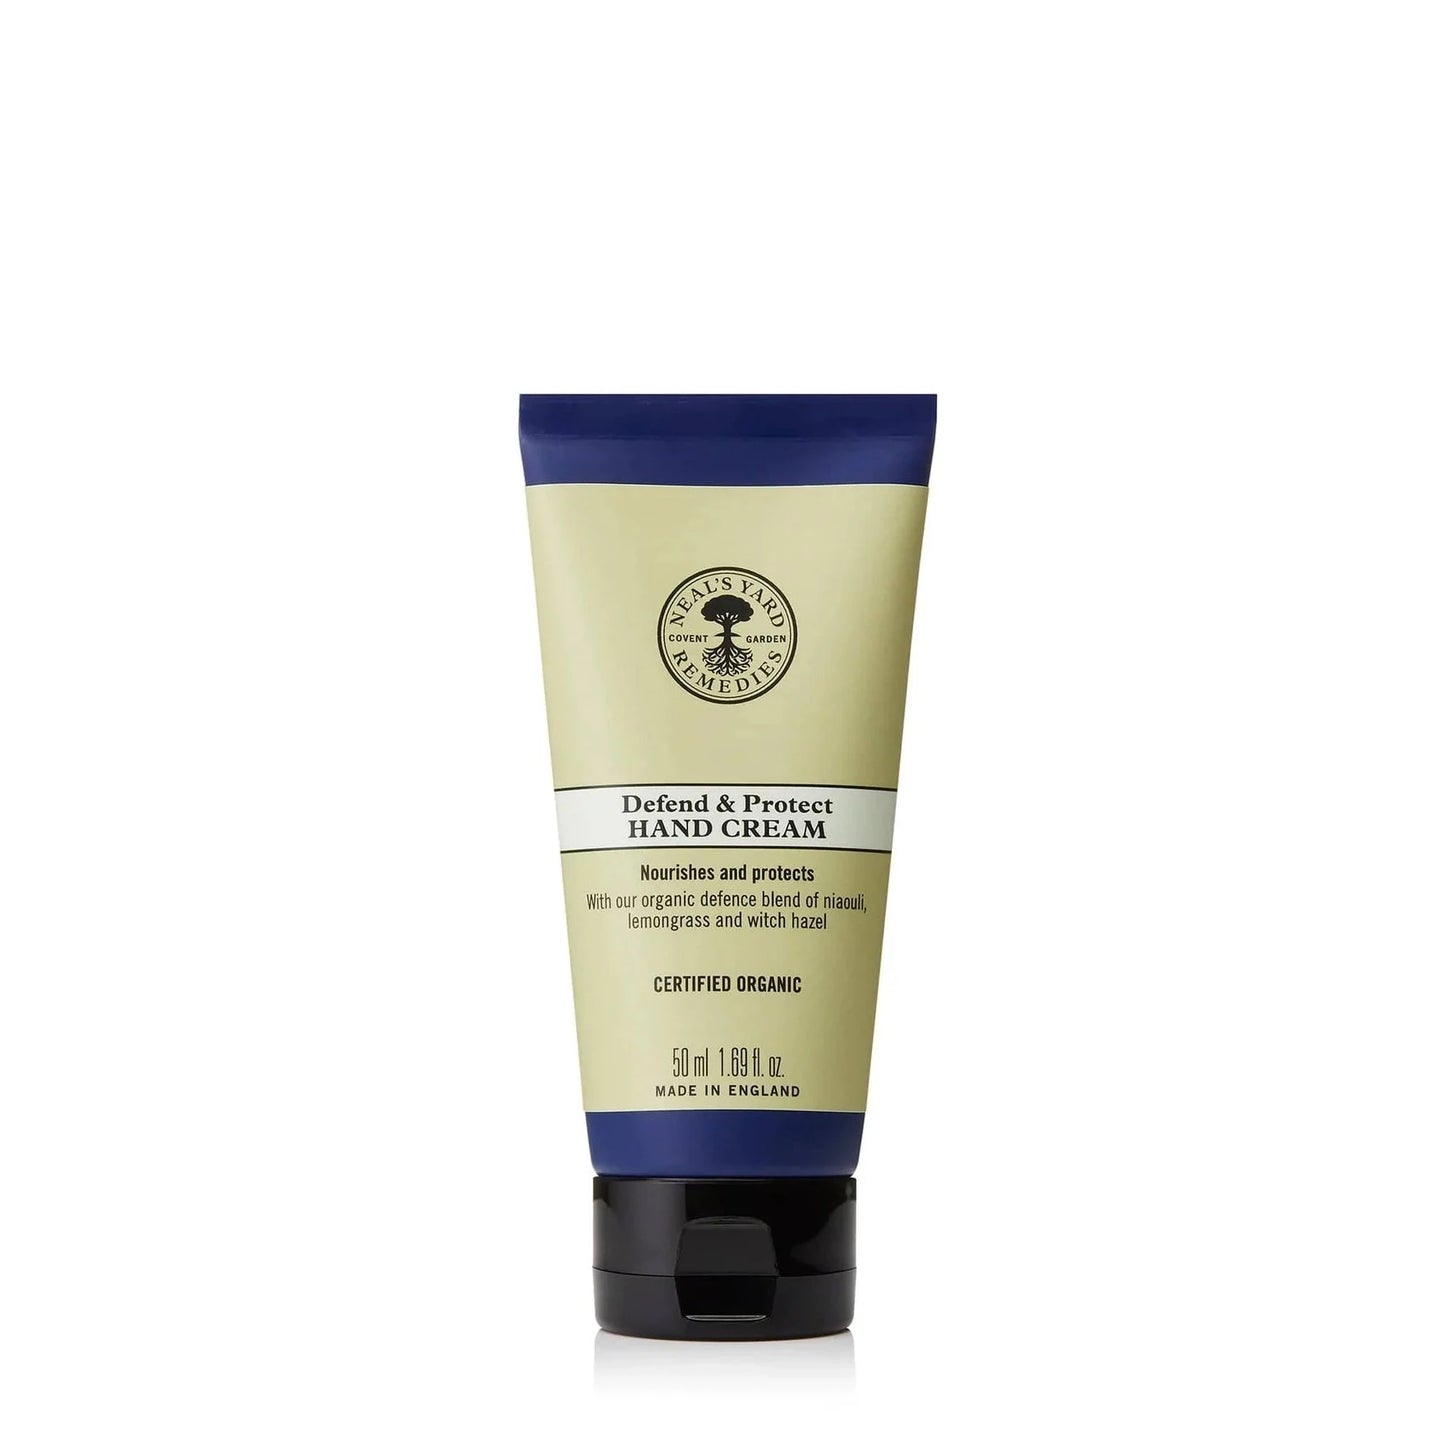 Neal's Yard Remedies Defend & Protect Hand Cream 50ml